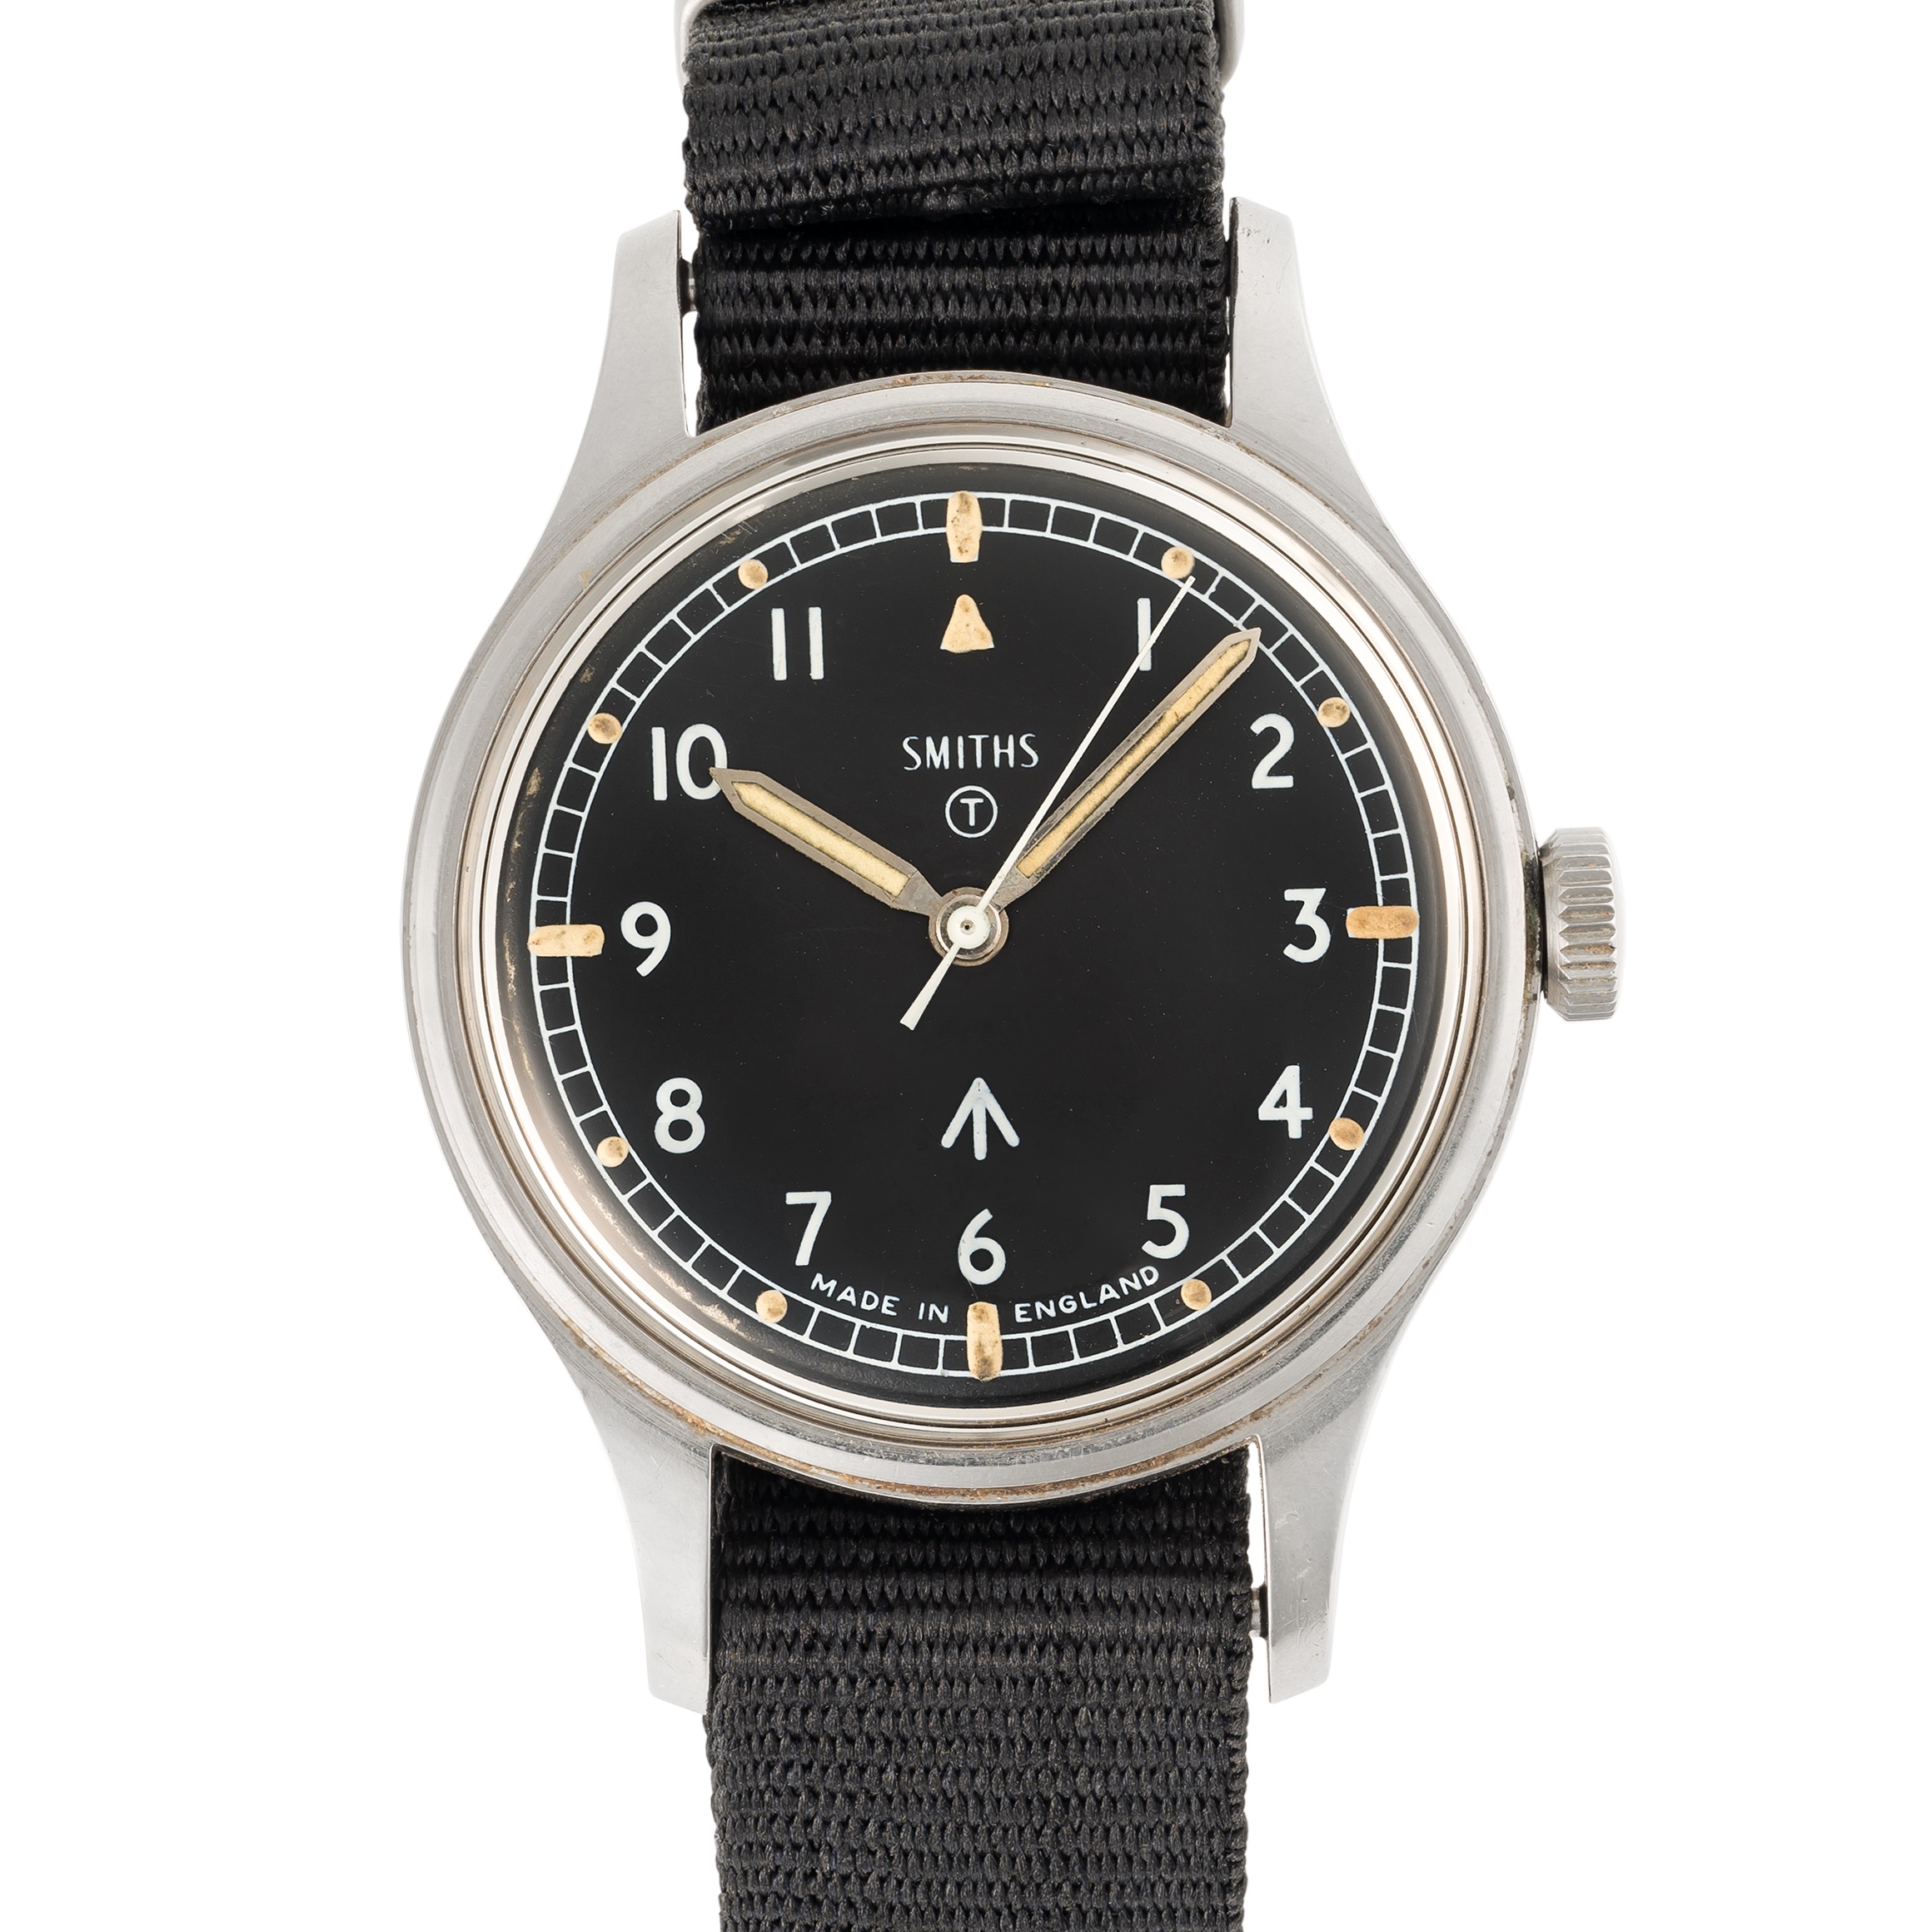 A GENTLEMAN'S STAINLESS STEEL BRITISH MILITARY SMITHS WRIST WATCH DATED 1969, ISSUED TO THE